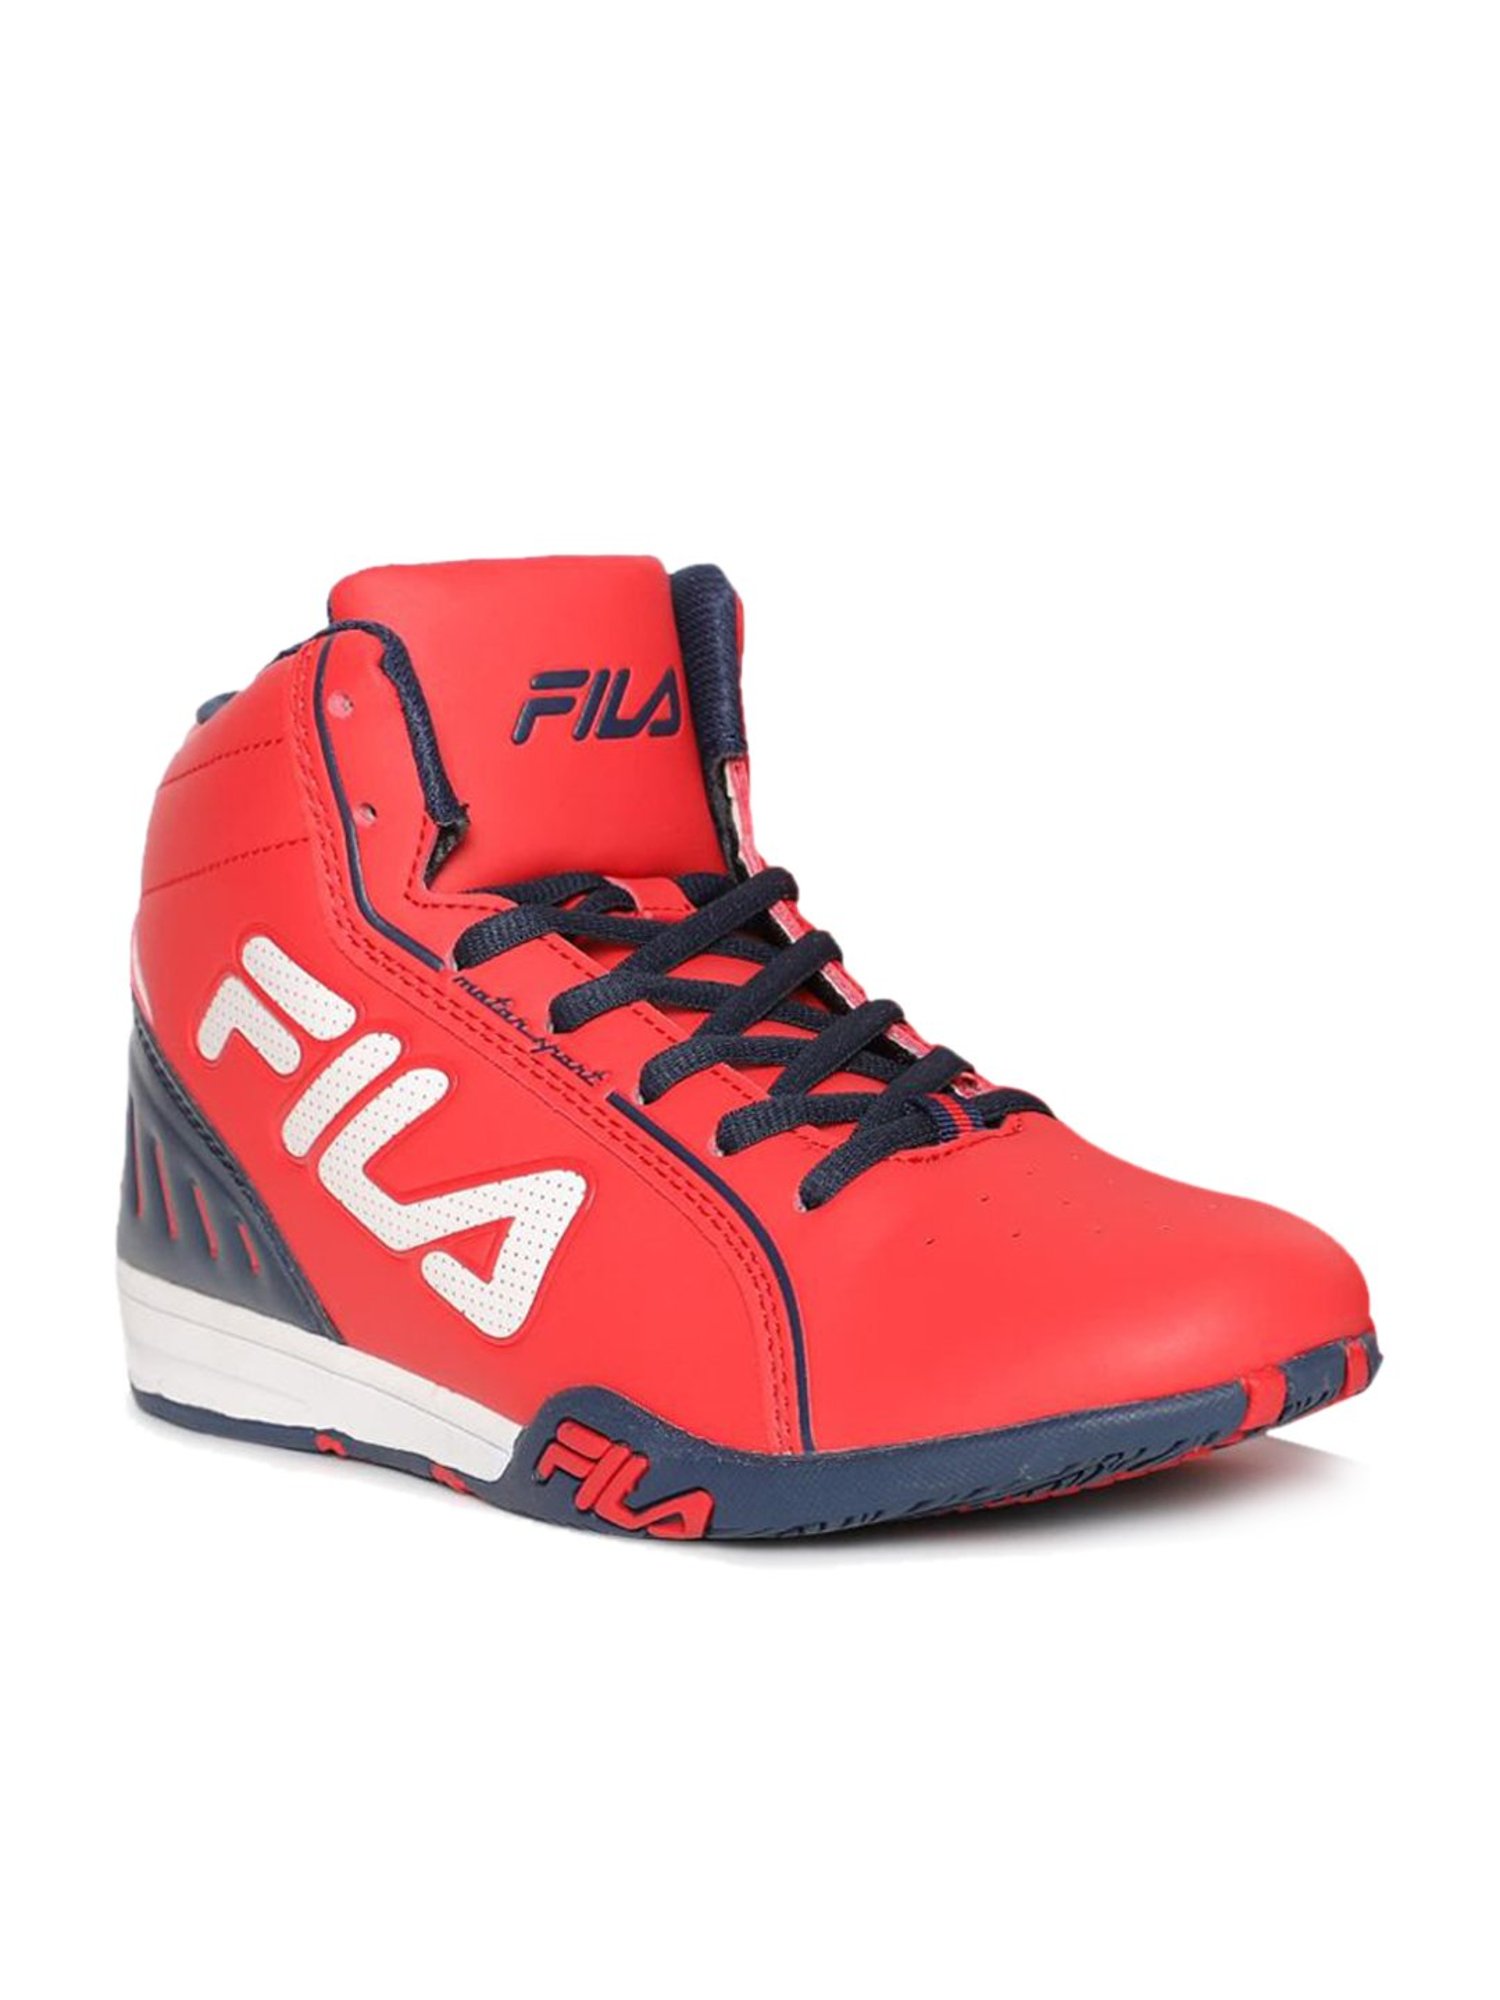 Buy Fila Men's Isonzo Plus Red High Sneakers for at Best Price @ Tata